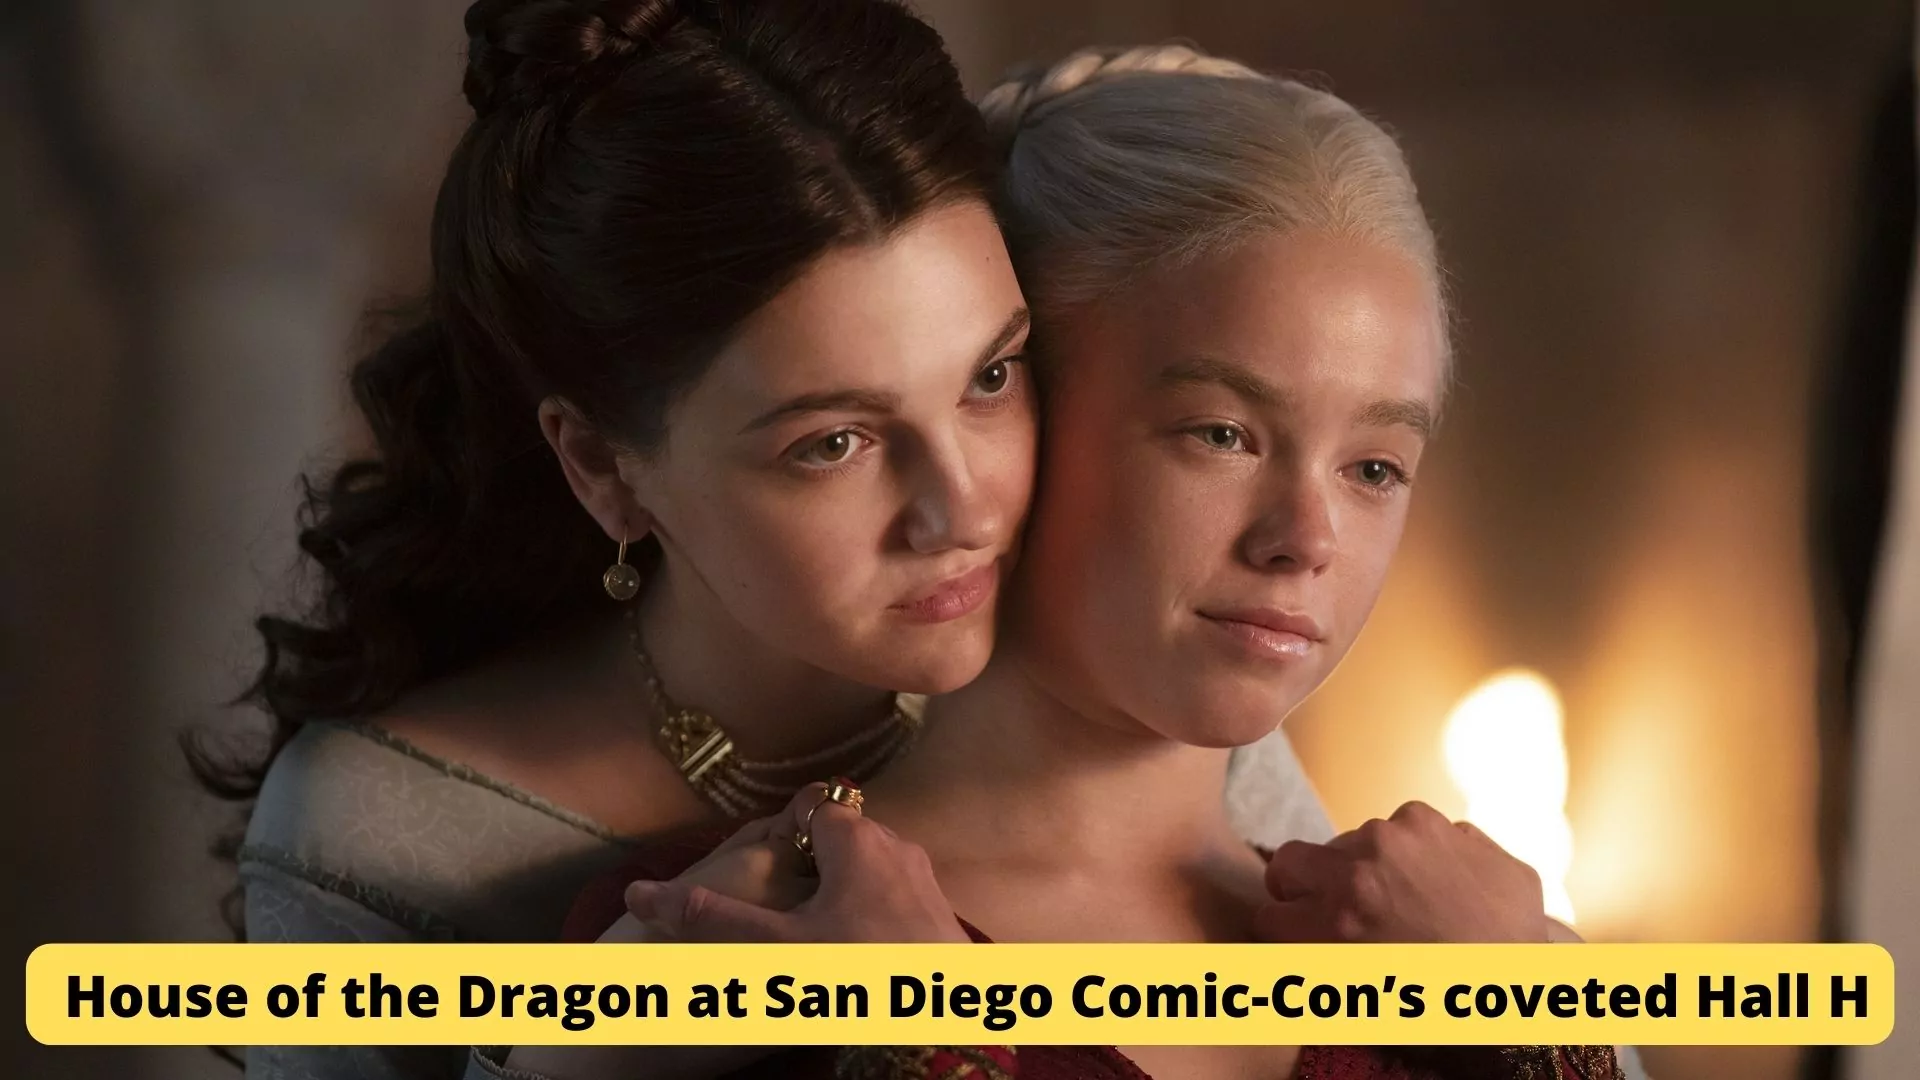 House of the Dragon at San Diego Comic-Con’s coveted Hall H